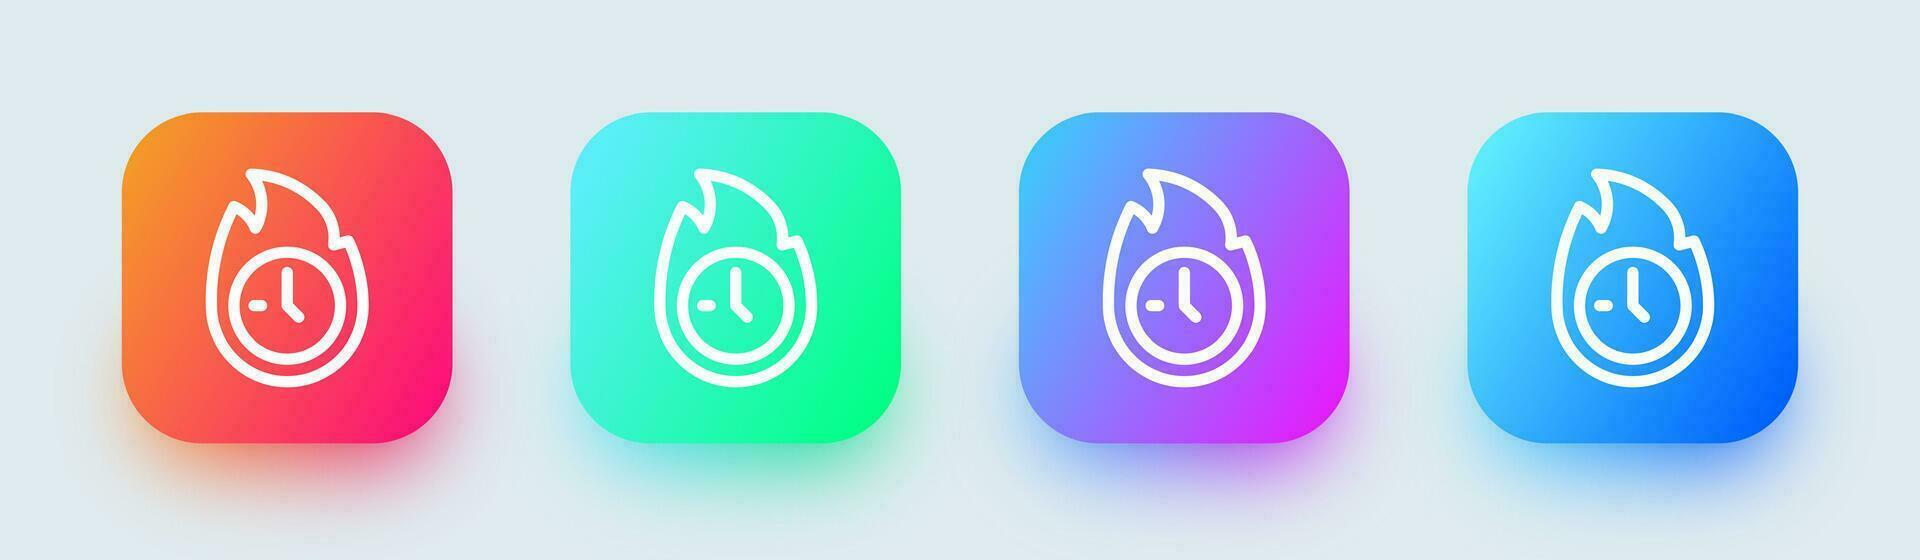 Limited line icon in square gradient colors. Time signs vector illustration.